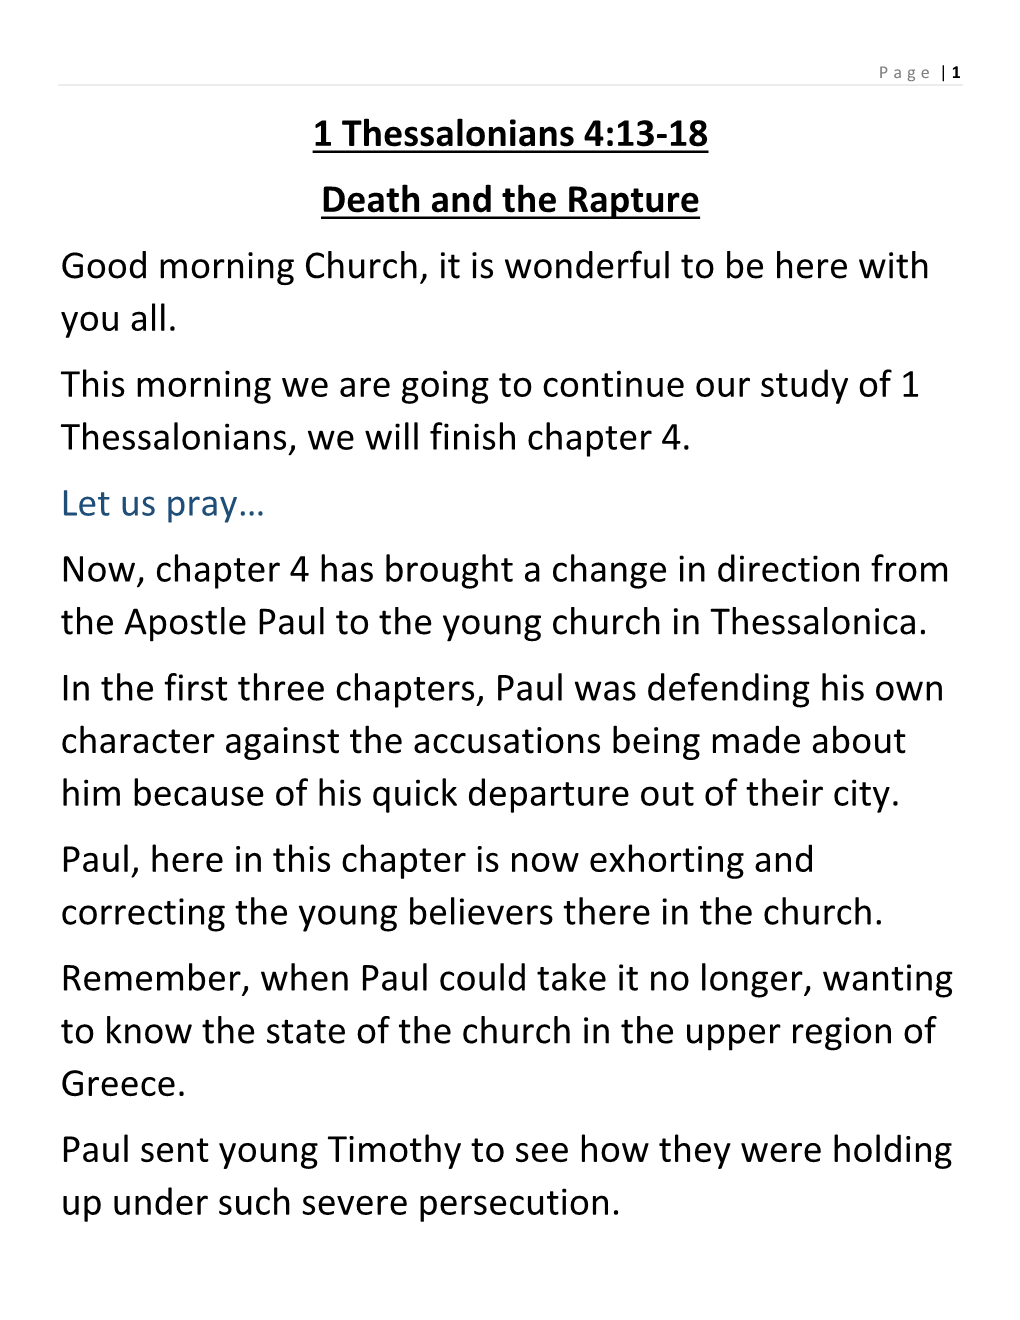 1 Thessalonians 4:13-18 Death and the Rapture Good Morning Church, It Is Wonderful to Be Here with You All. This Morning We